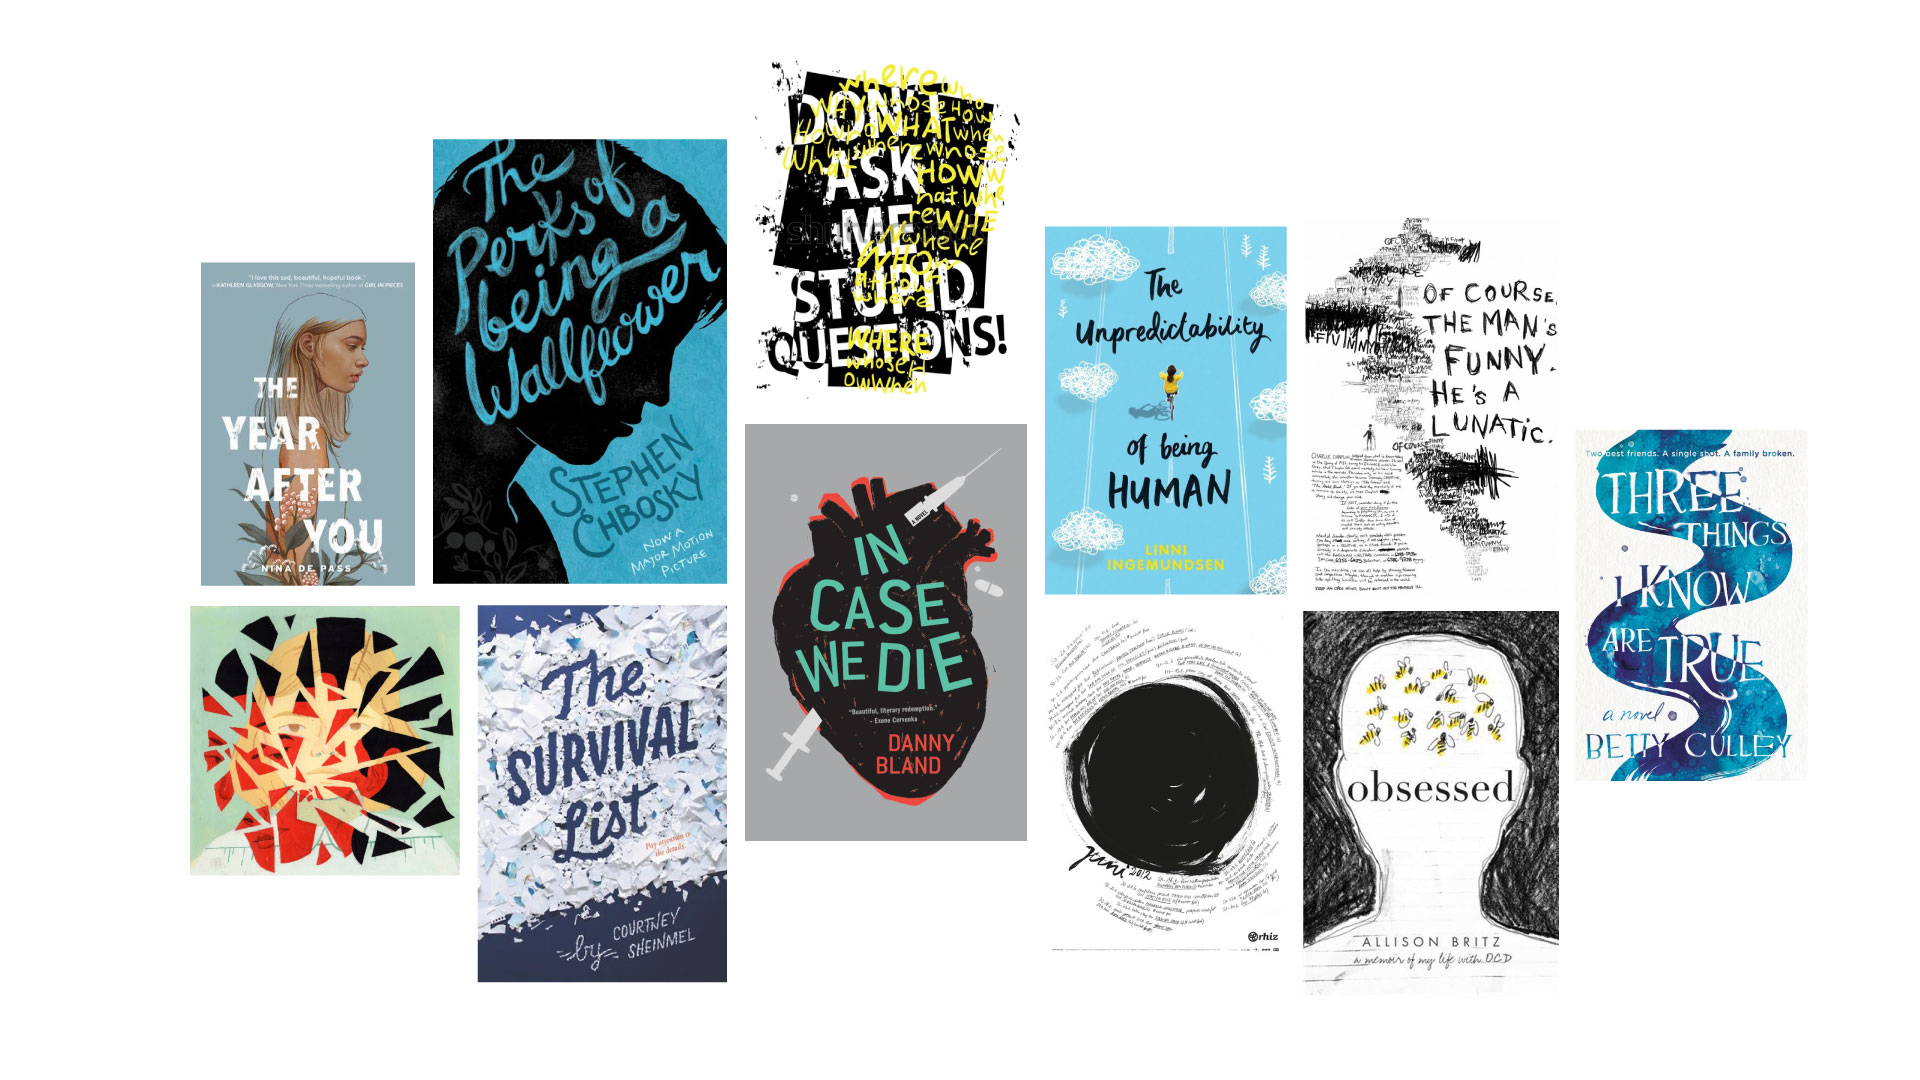 A collection of images side by side, featuring scribbled text, silhouettes of people, book covers and posters, and fragments. The color scheme is predominantly blue, black and white.